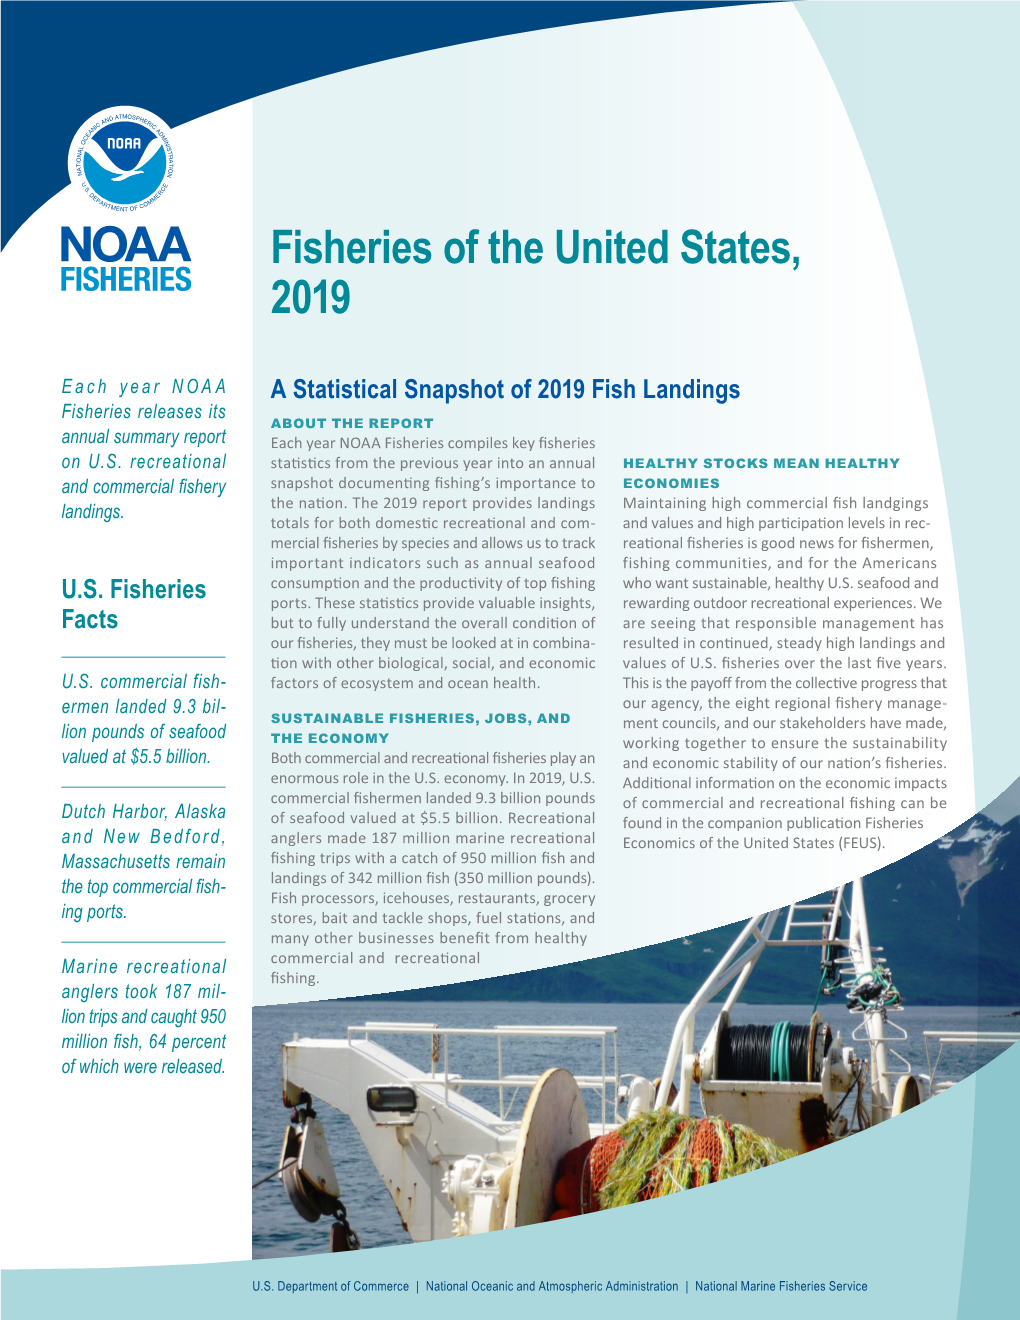 Fisheries of the United States, 2019 Fact Sheet